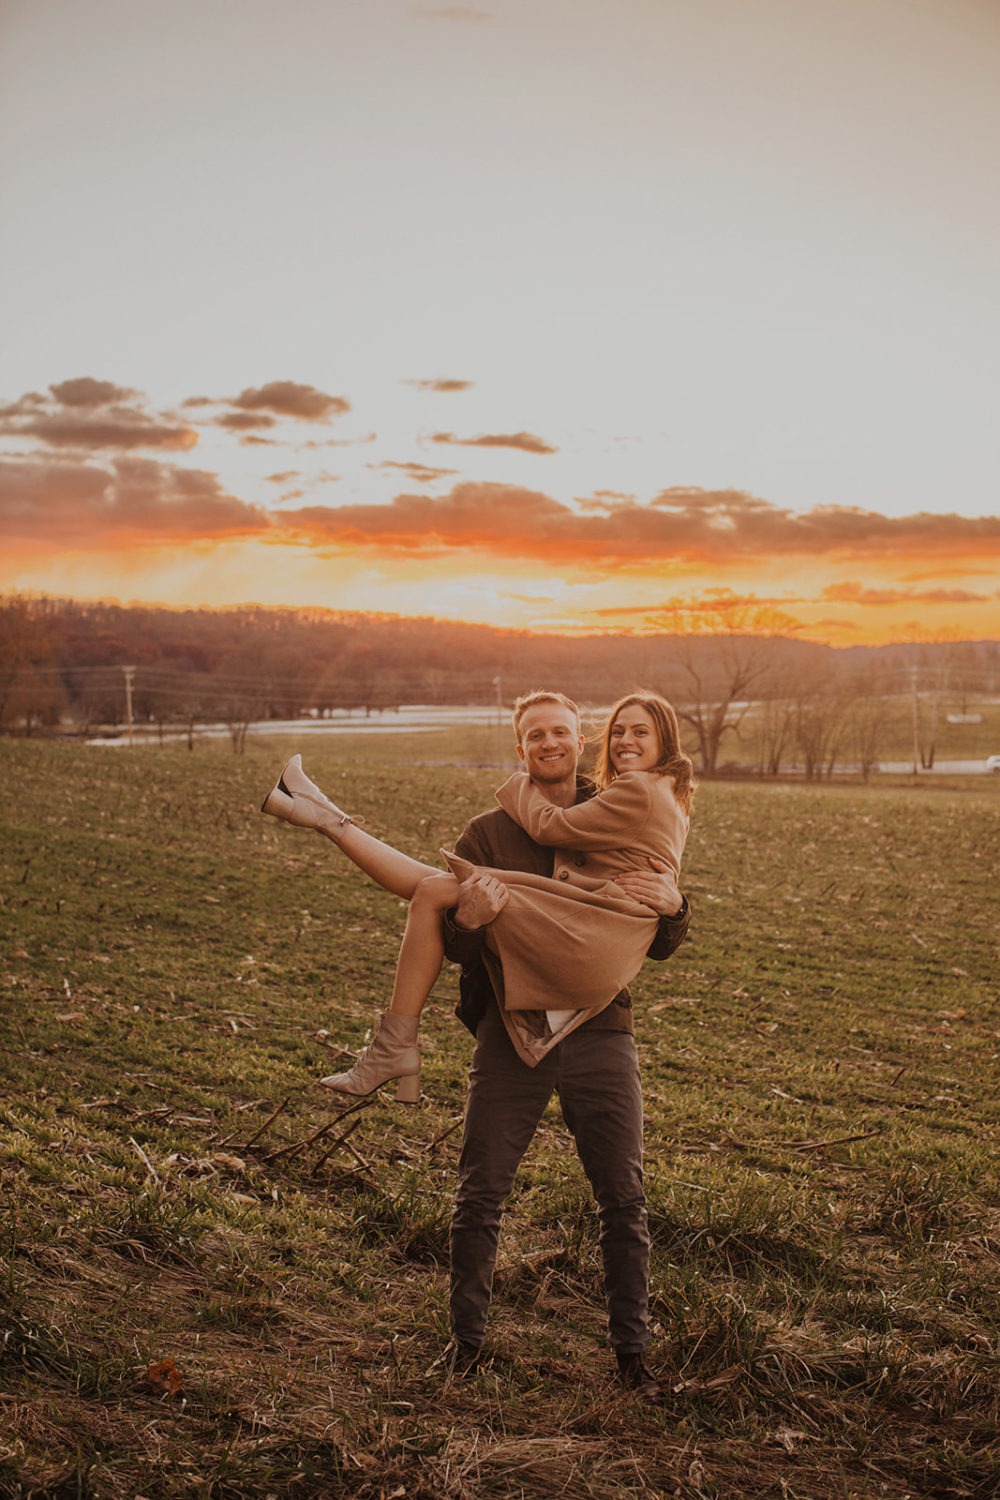 man lifts woman in field at sunset